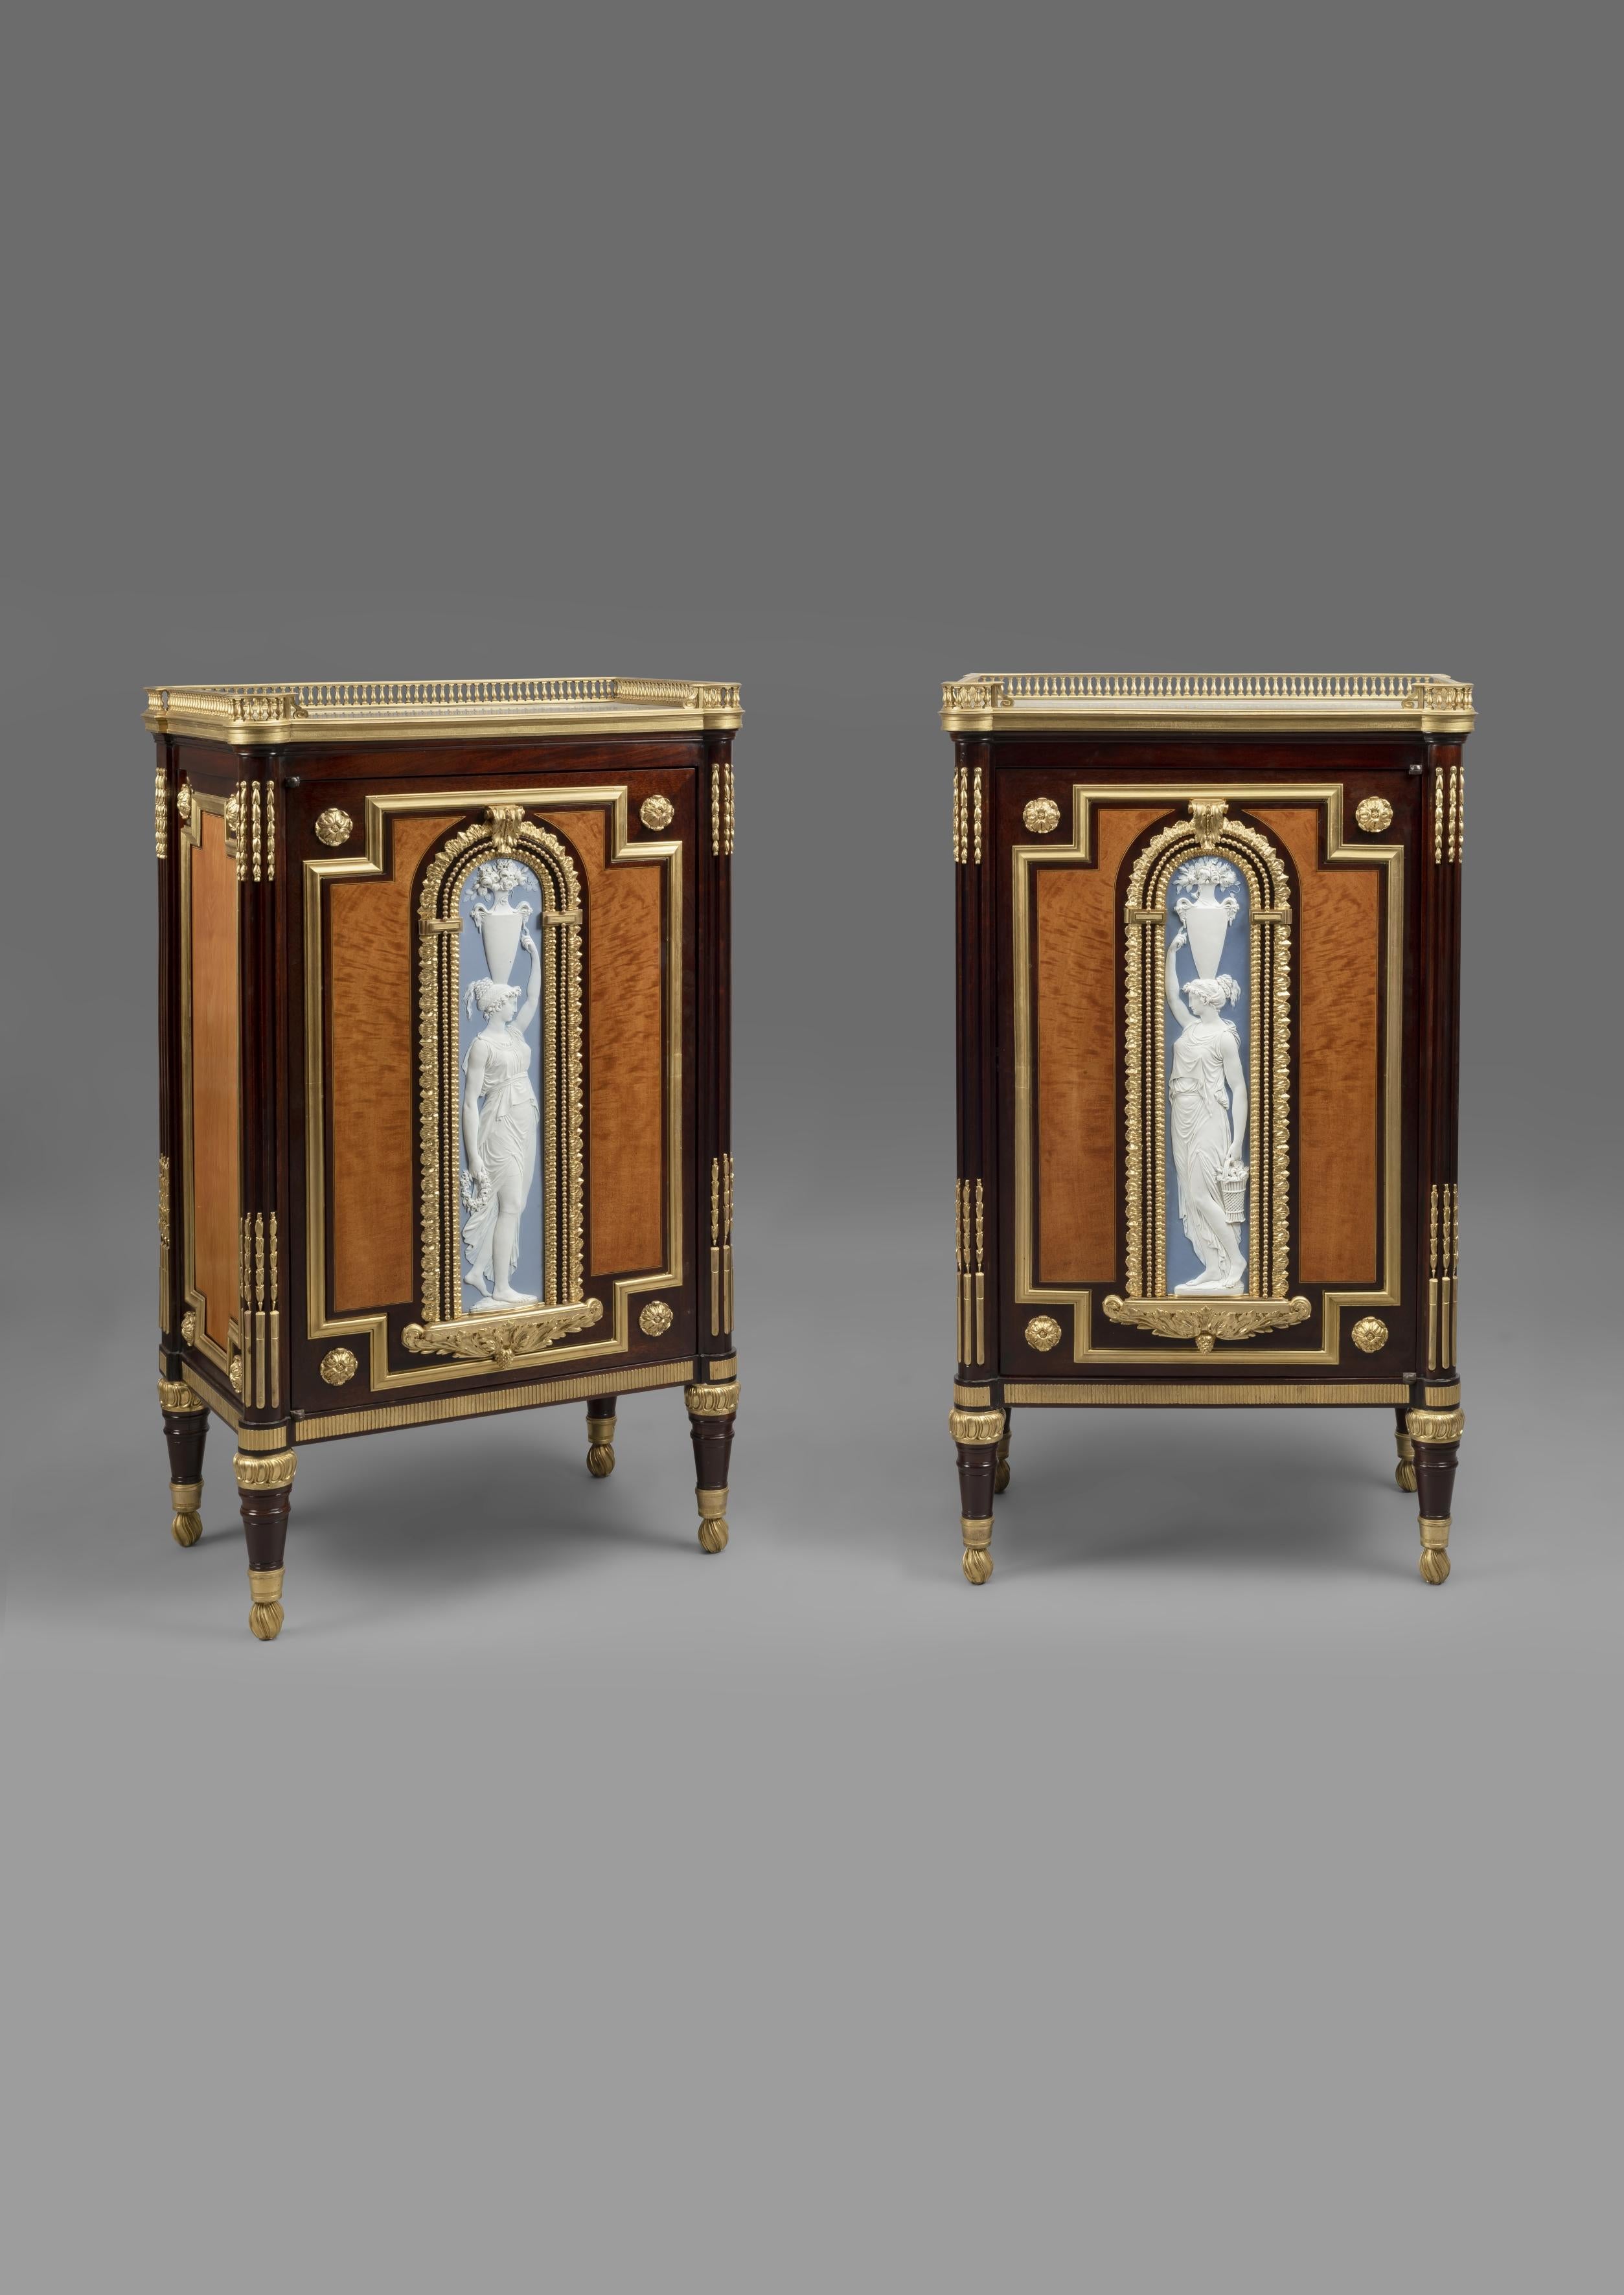 A rare and highly important pair of neoclassical style gilt-bronze and biscuit porcelain mounted mahogany side cabinets, by Jules Piret.

French, circa 1860 incorporating 18th century elements. 
The porcelain plaques late 18th century.

Stamped